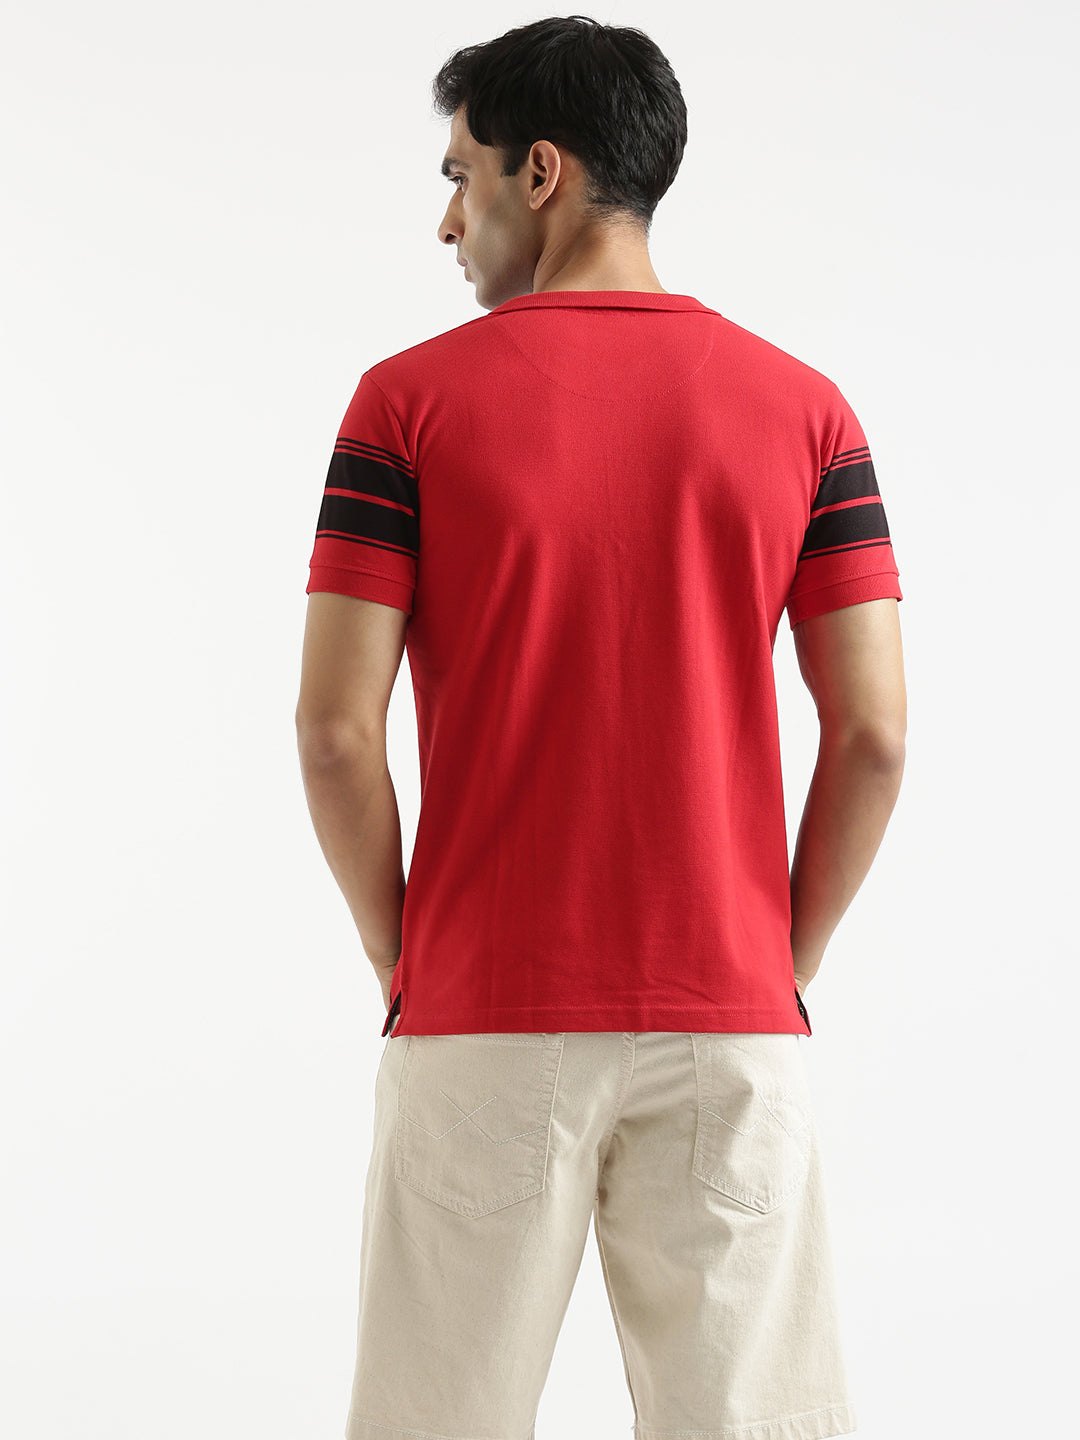 Abstract Lines Polo T-Shirt